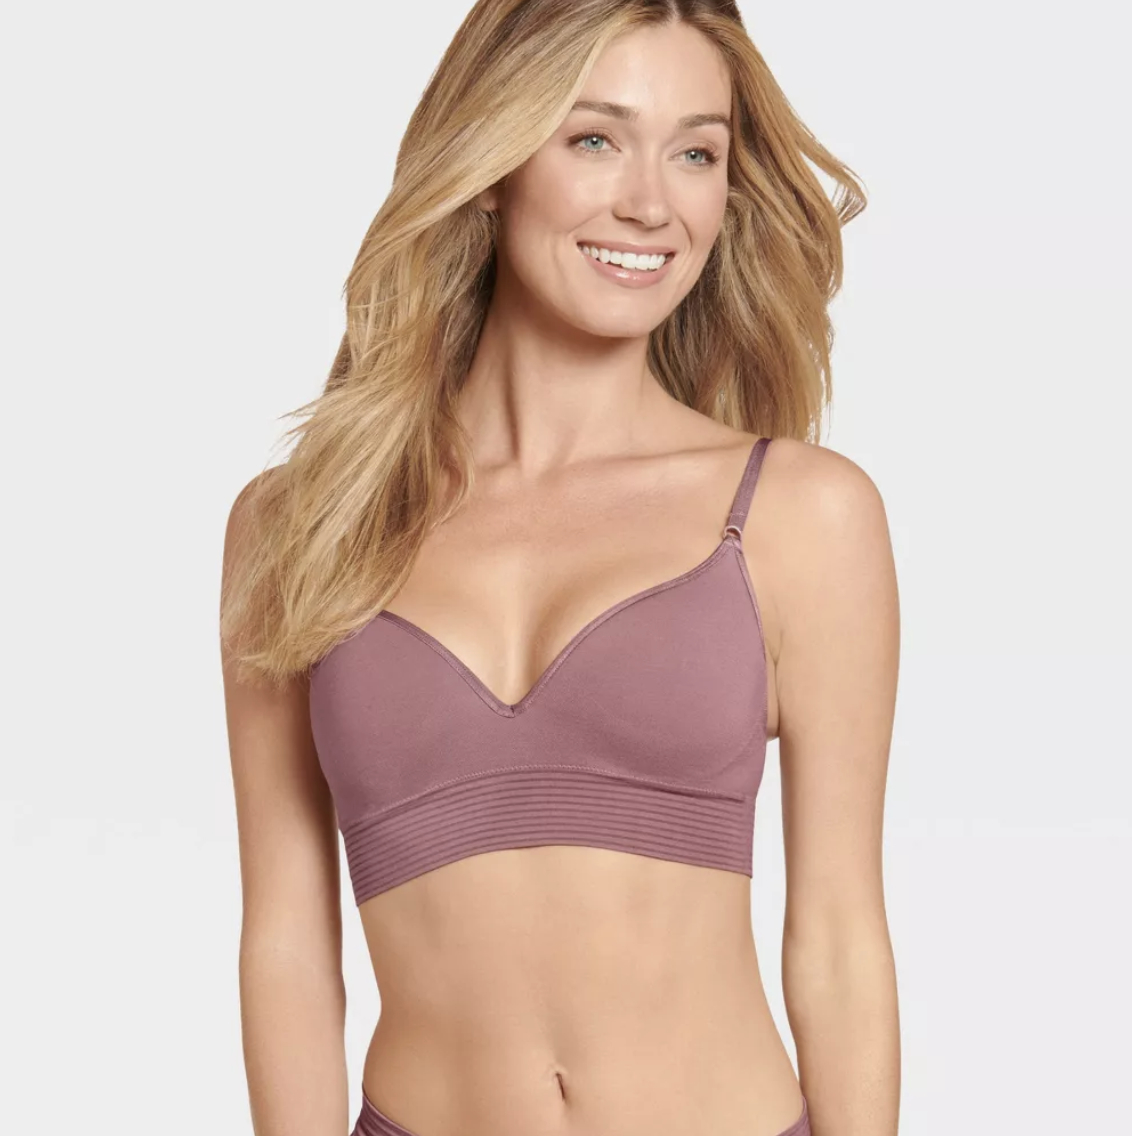 model wearing a simple, seamless bralette for a comfortable fit